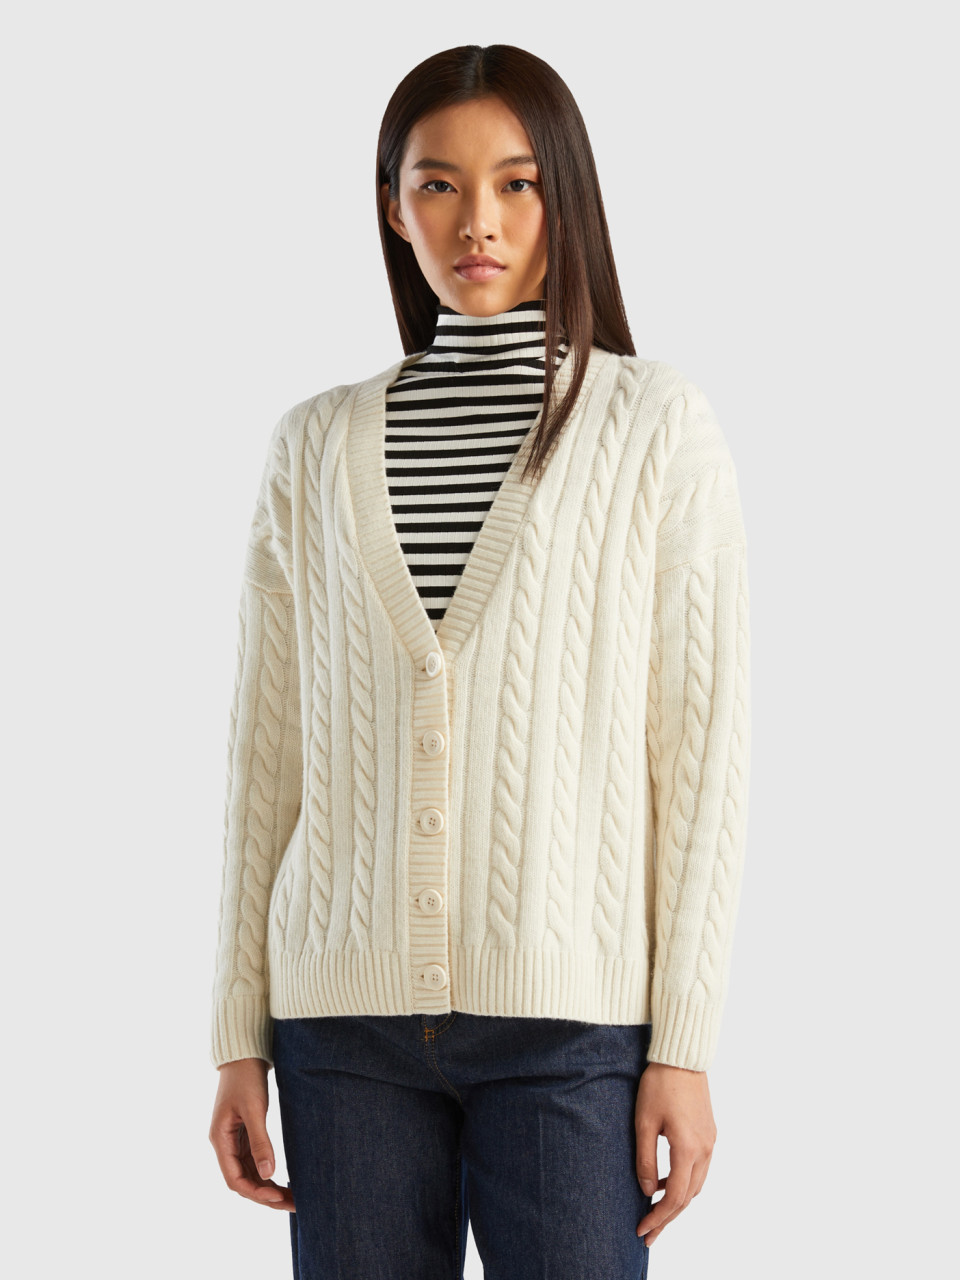 Benetton, Oversized Fit Cardigan With Cables, Creamy White, Women